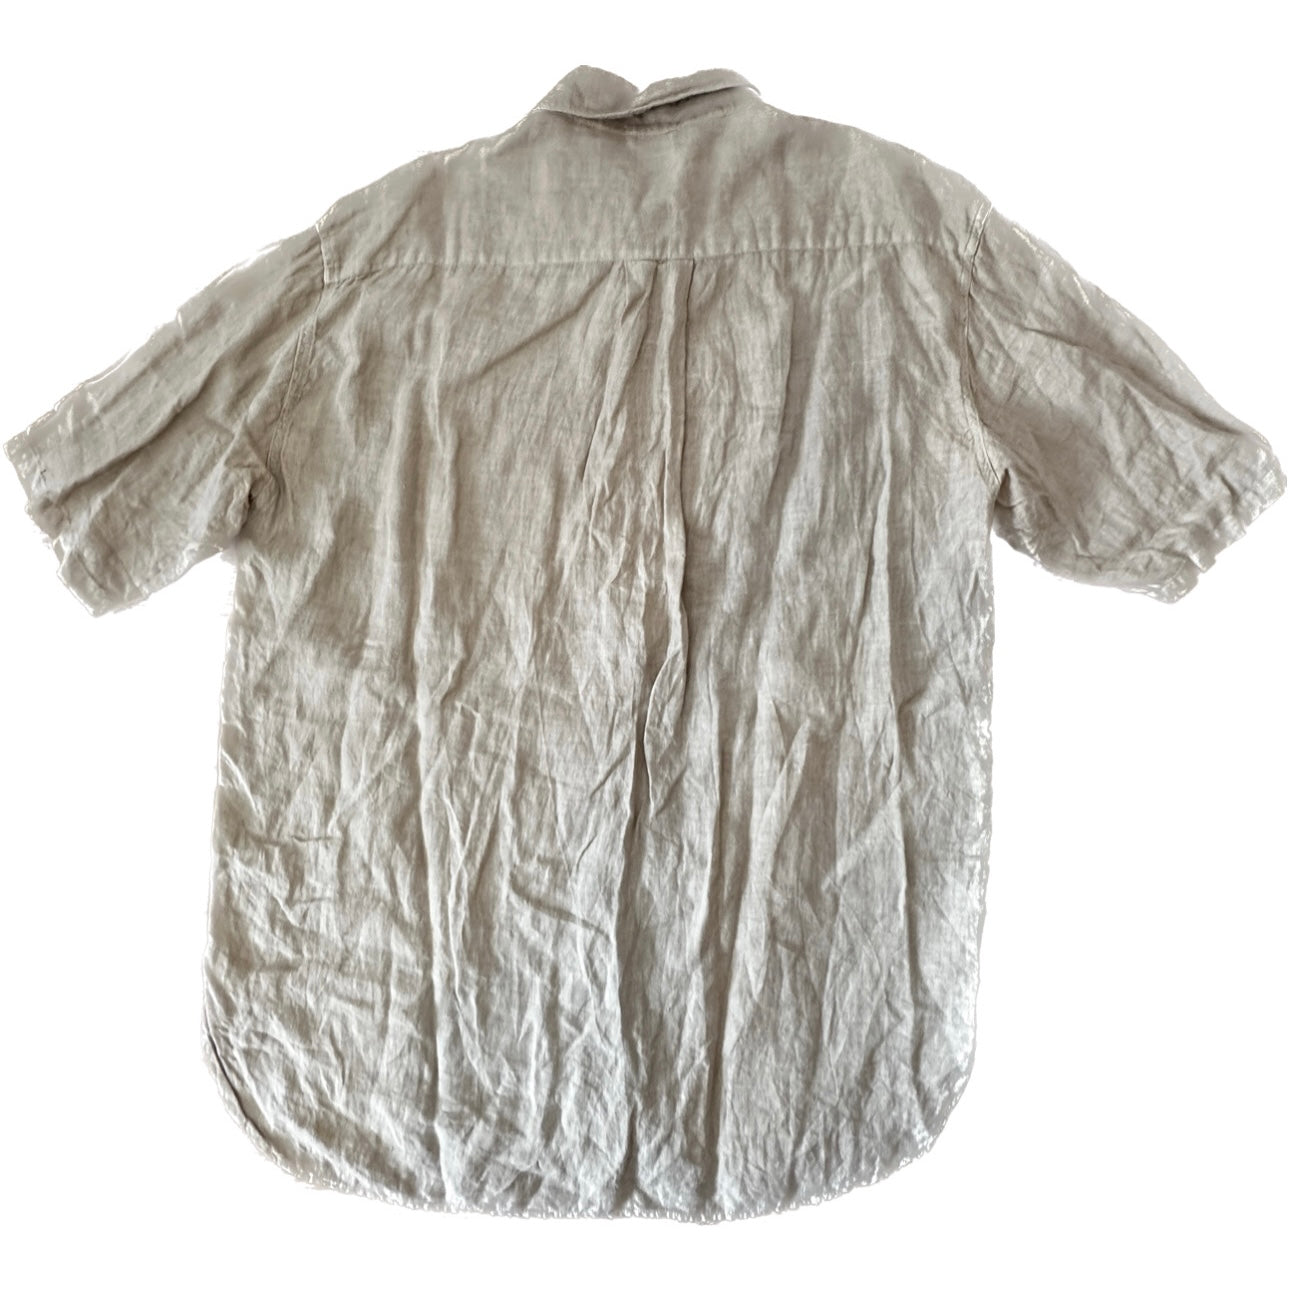 C.P. Company 80s Vintage Linen Shirt - XL - Made in Italy